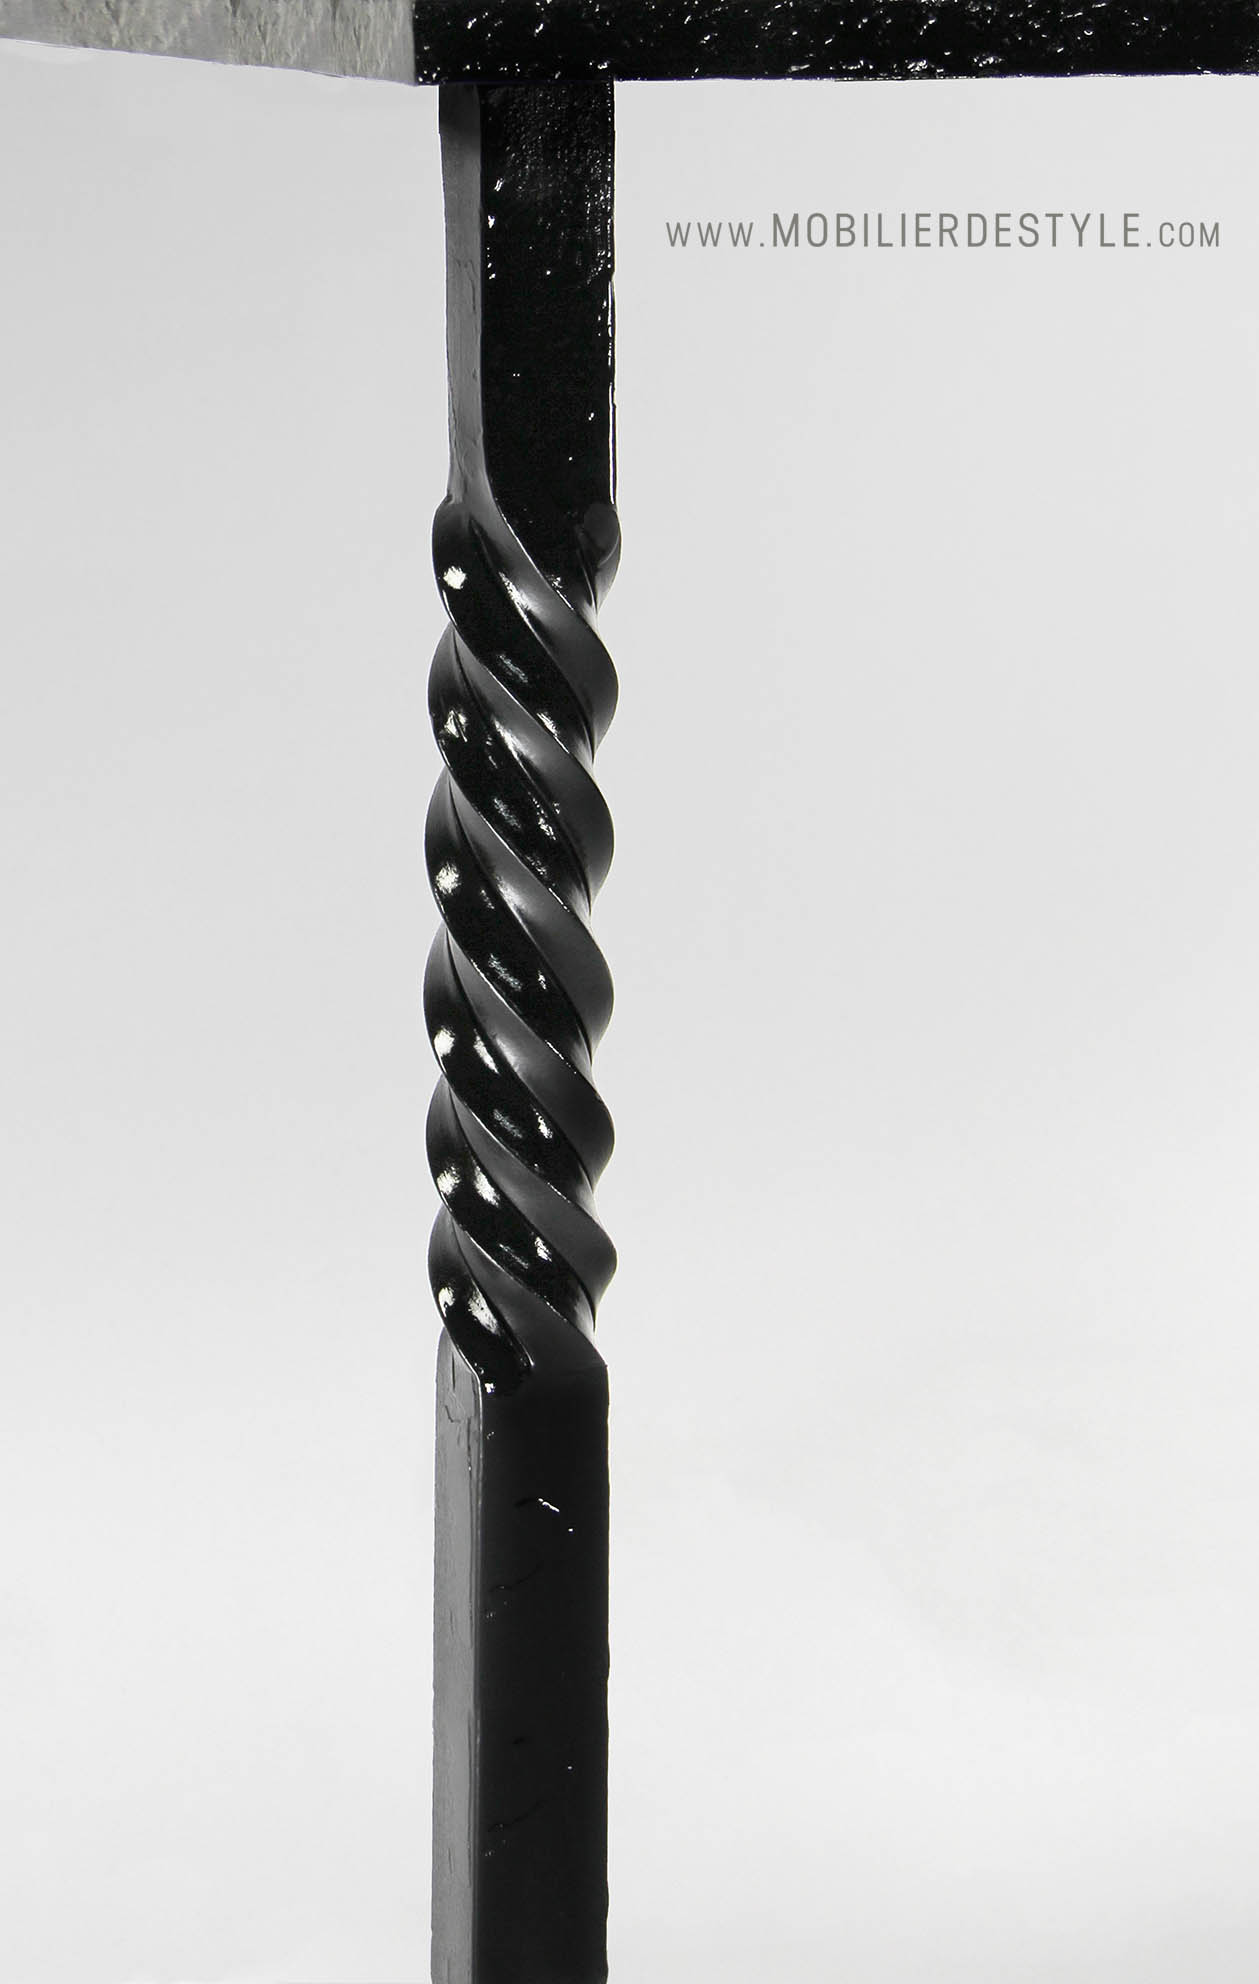 Finition 4 : Black painted wrought iron